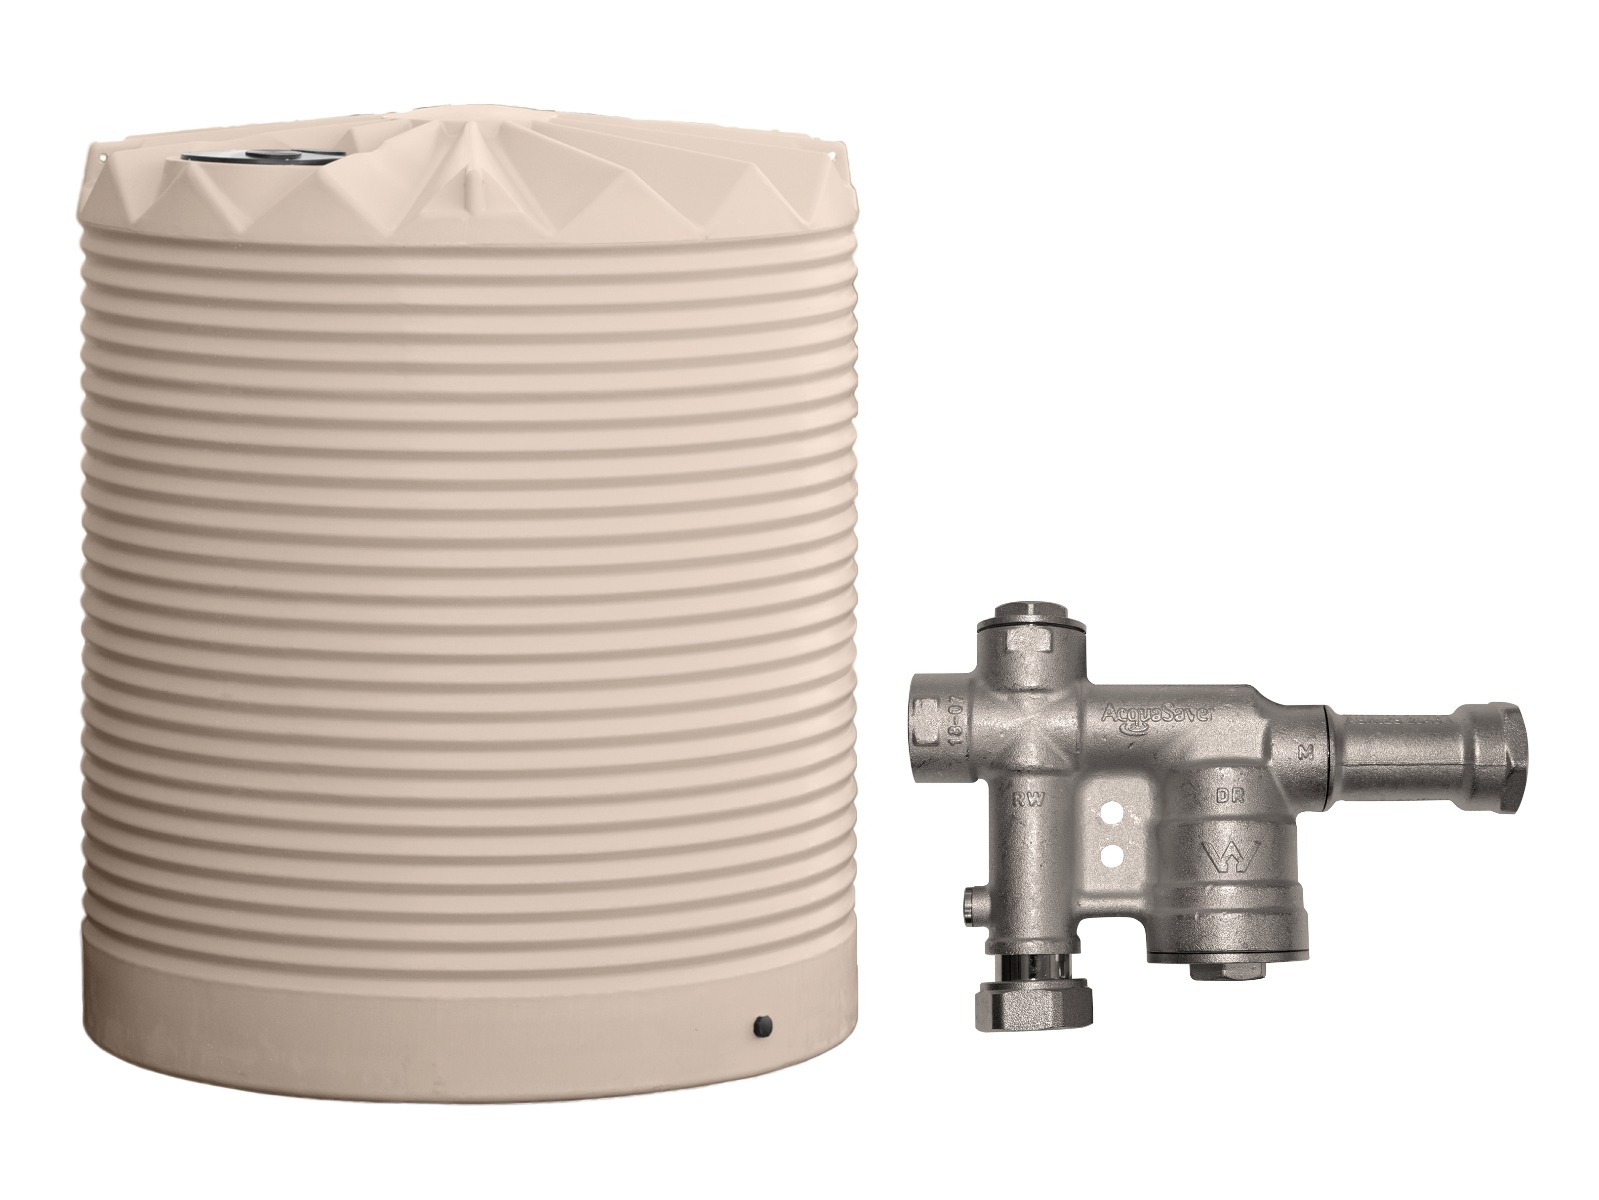 Rainwater tank with mains water switch